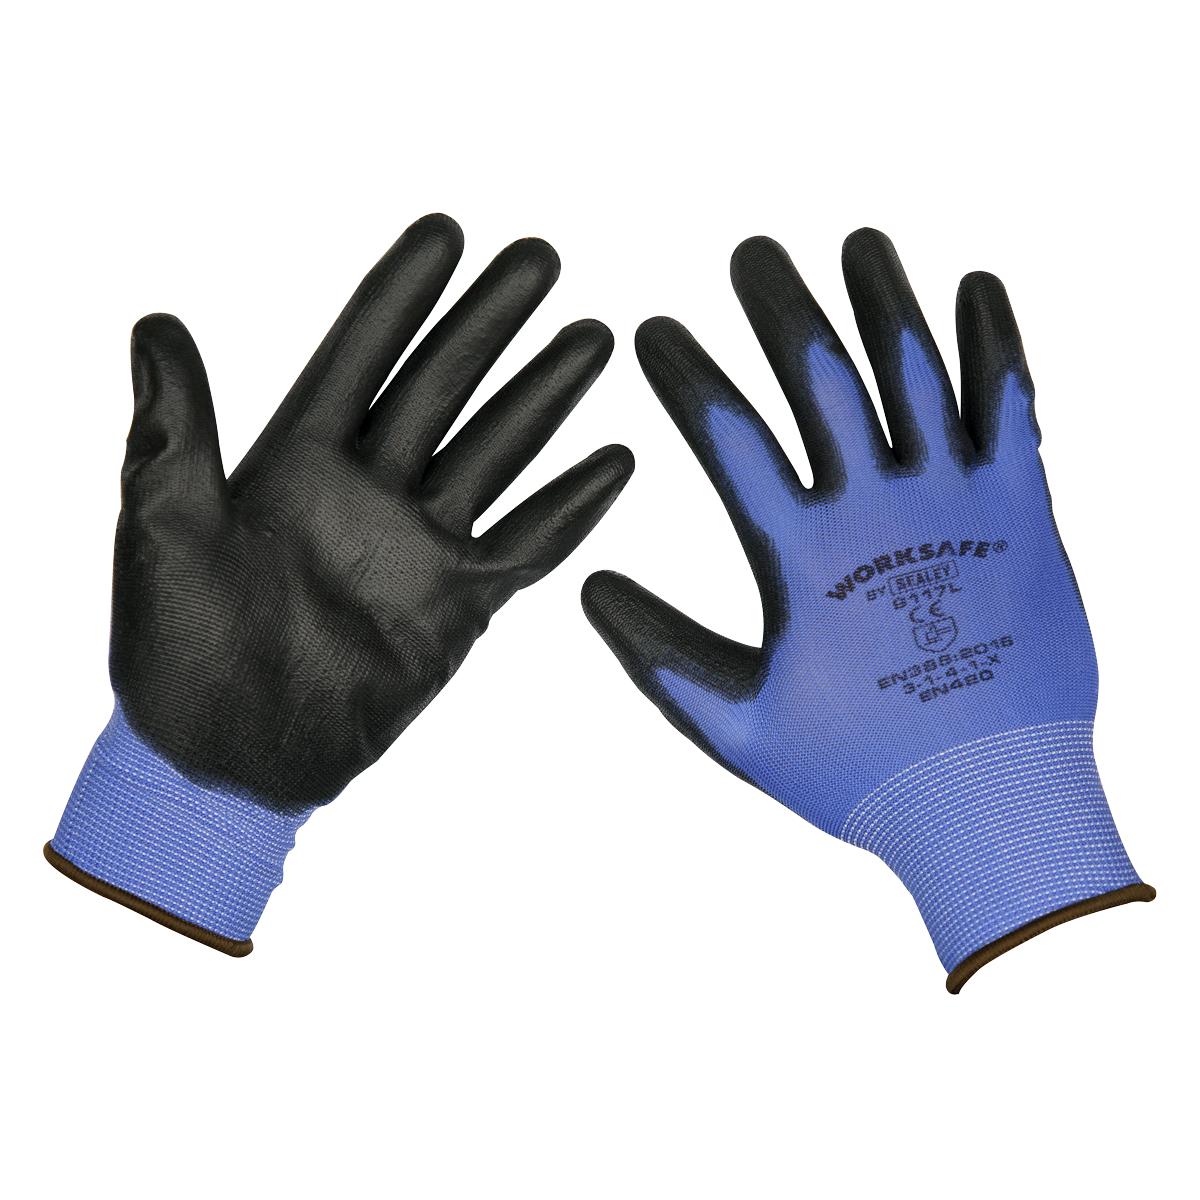 Sealey Lightweight Precision Grip Gloves (Large) - Pair 9117L